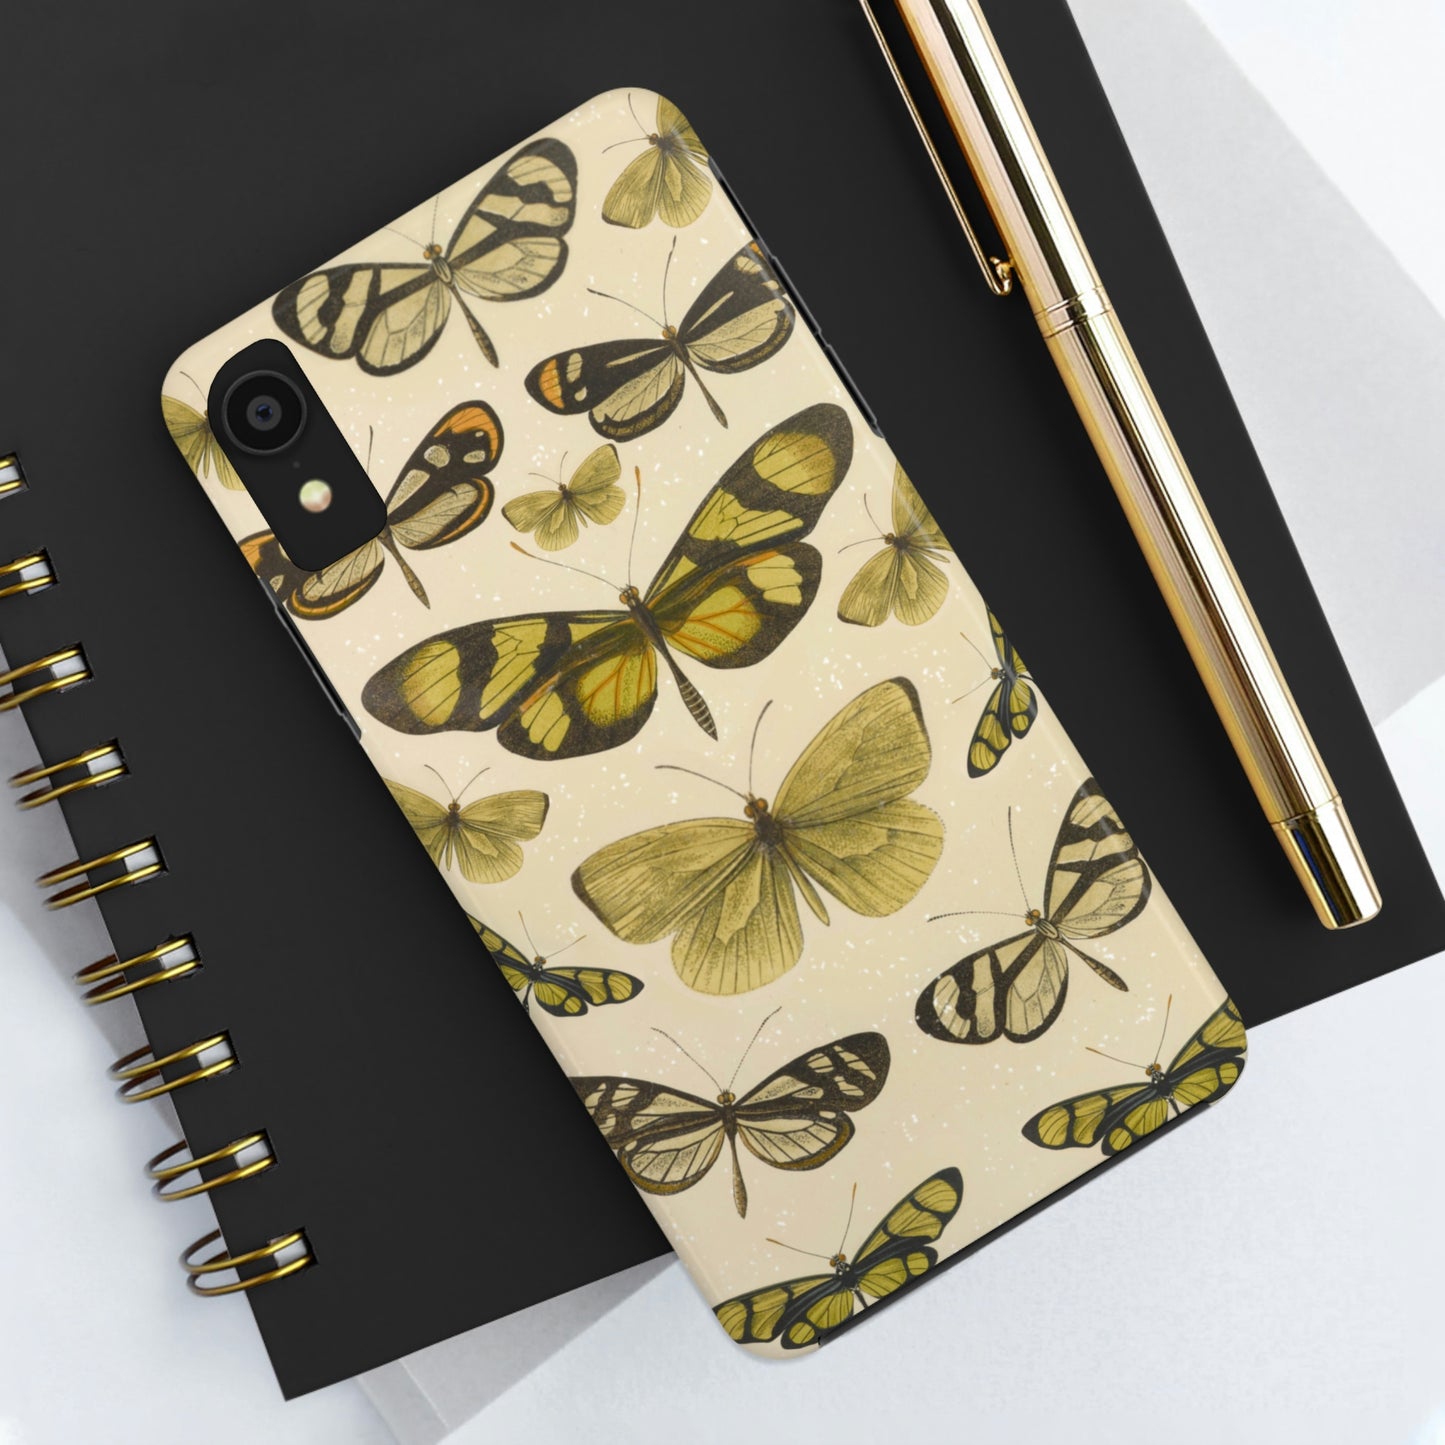 Yellow butterfly Tough Phone Cases